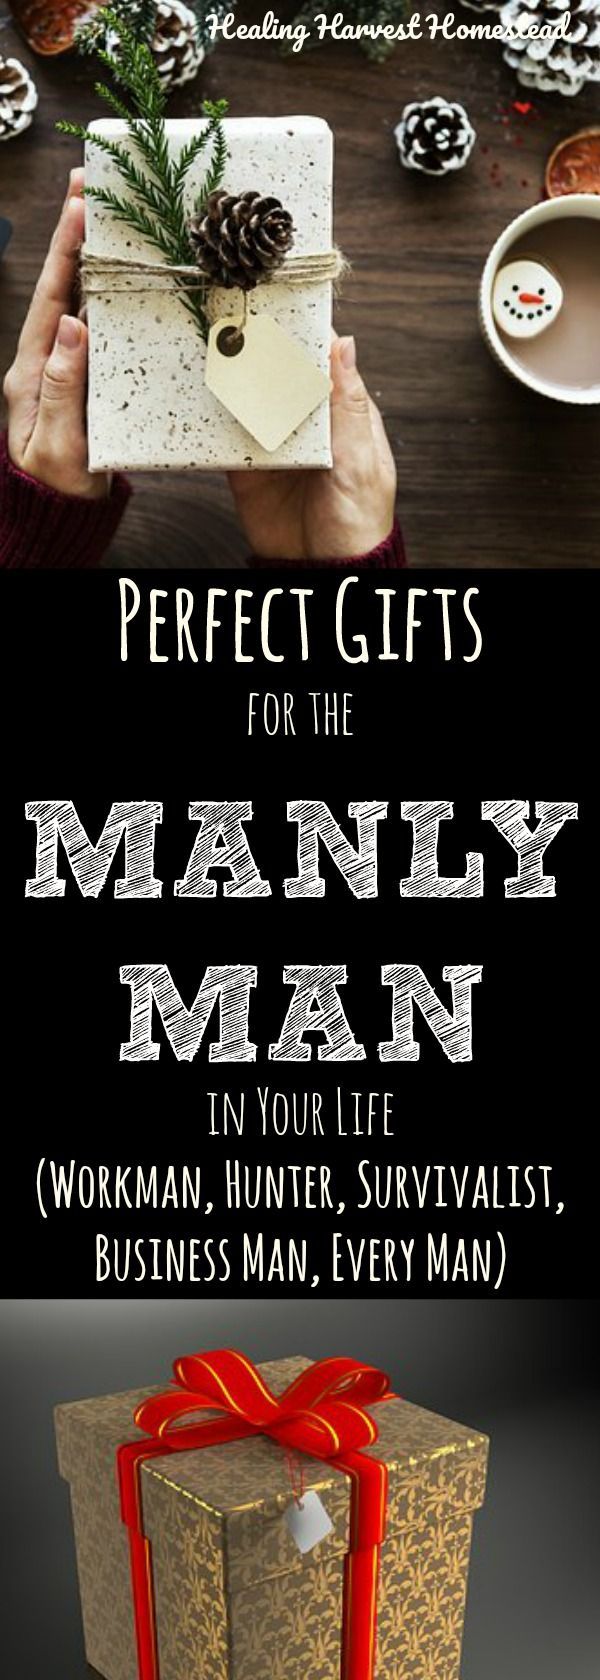 Manly Man Gift Guide for ALL the Men in Your Life (100+ Gift Ideas for the Working Man, Survivalist, Hunter/Sportsman, Business Man, Golfer, Camper, Kayaker, and MORE!) — All Posts Healing Harvest Homestead - Manly Man Gift Guide for ALL the Men in Your Life (100+ Gift Ideas for the Working Man, Survivalist, Hunter/Sportsman, Business Man, Golfer, Camper, Kayaker, and MORE!) — All Posts Healing Harvest Homestead -   18 diy Gifts for guys ideas